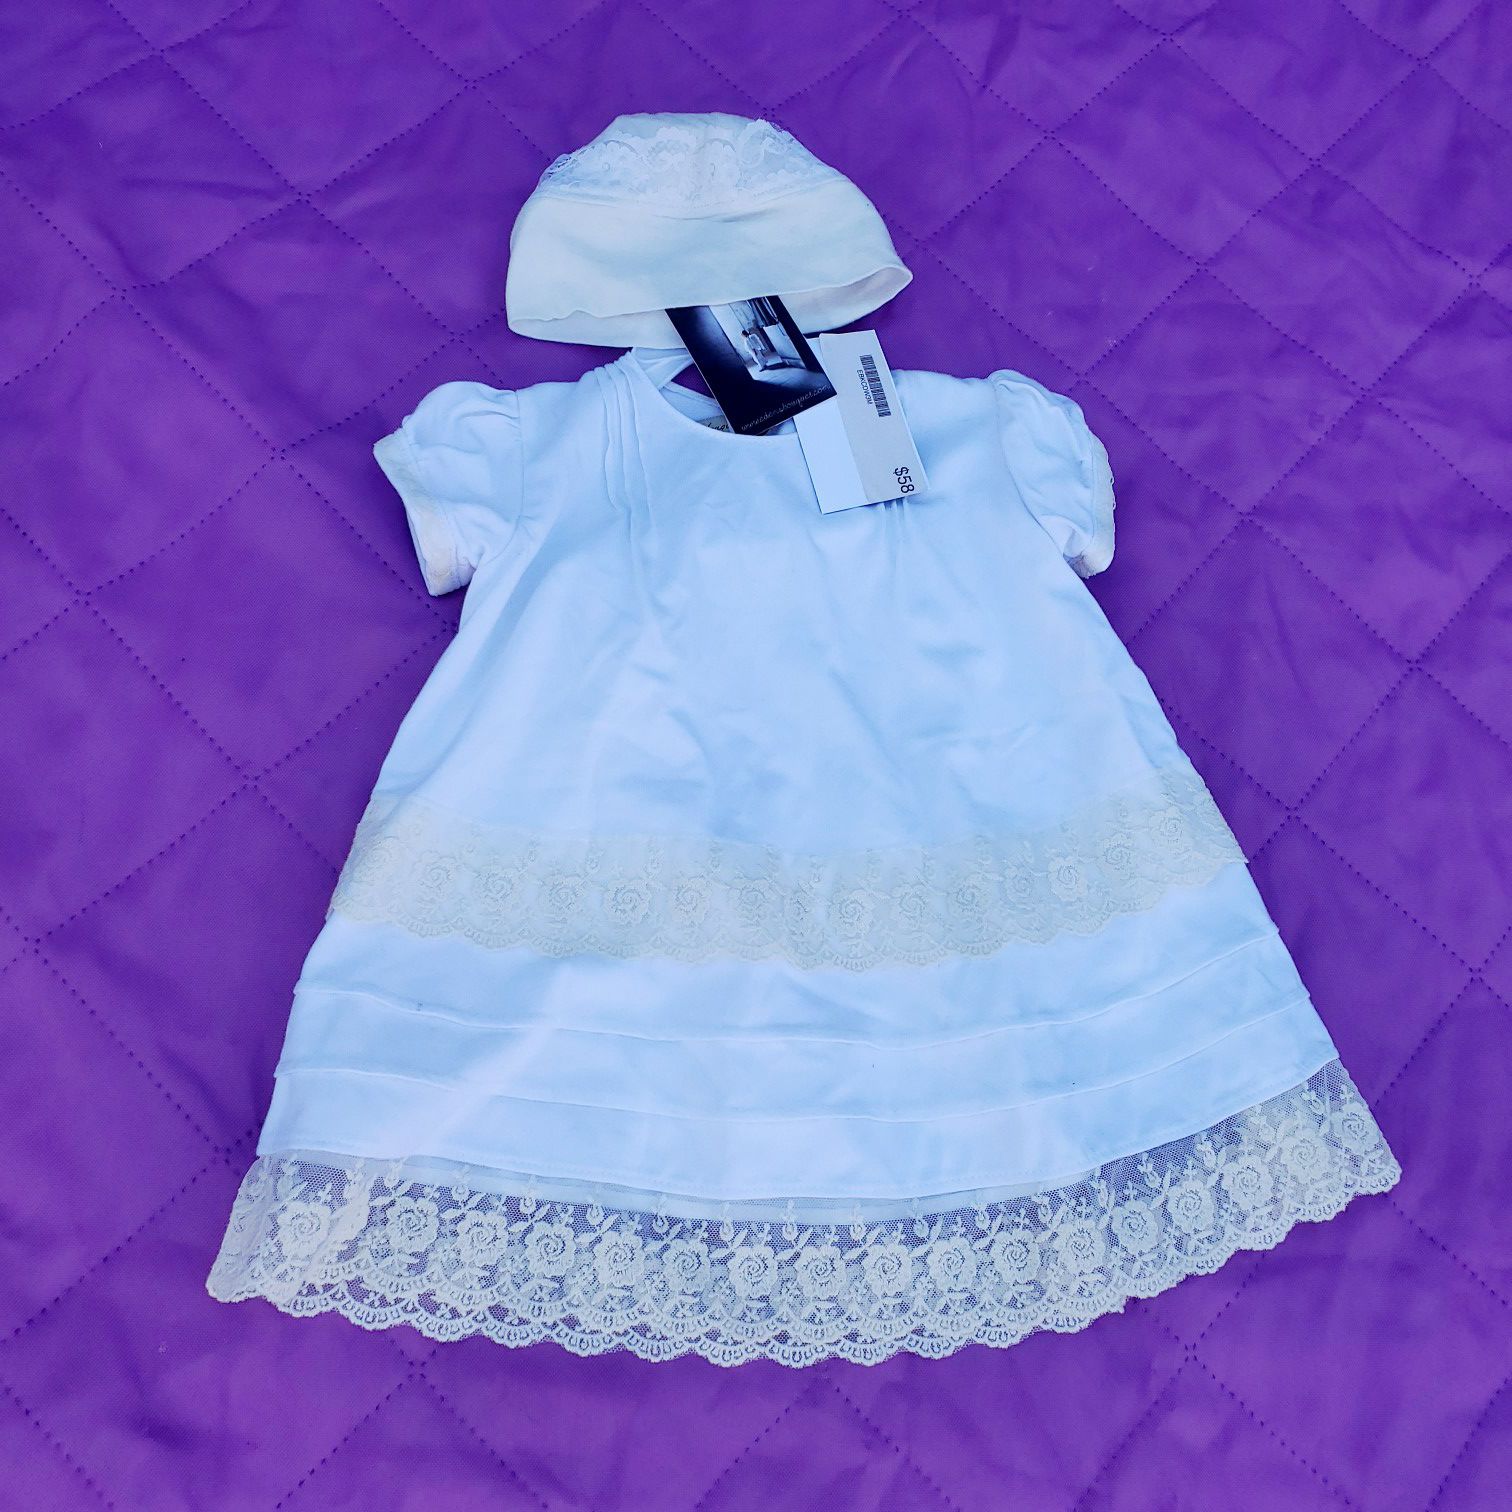 NEW!! ONE OF A KIND SPECIAL WHITE AND CREAM LACE BABY GIRL DRESS W/ MATCHING HAT AND RATTLE STUFFED BEAR